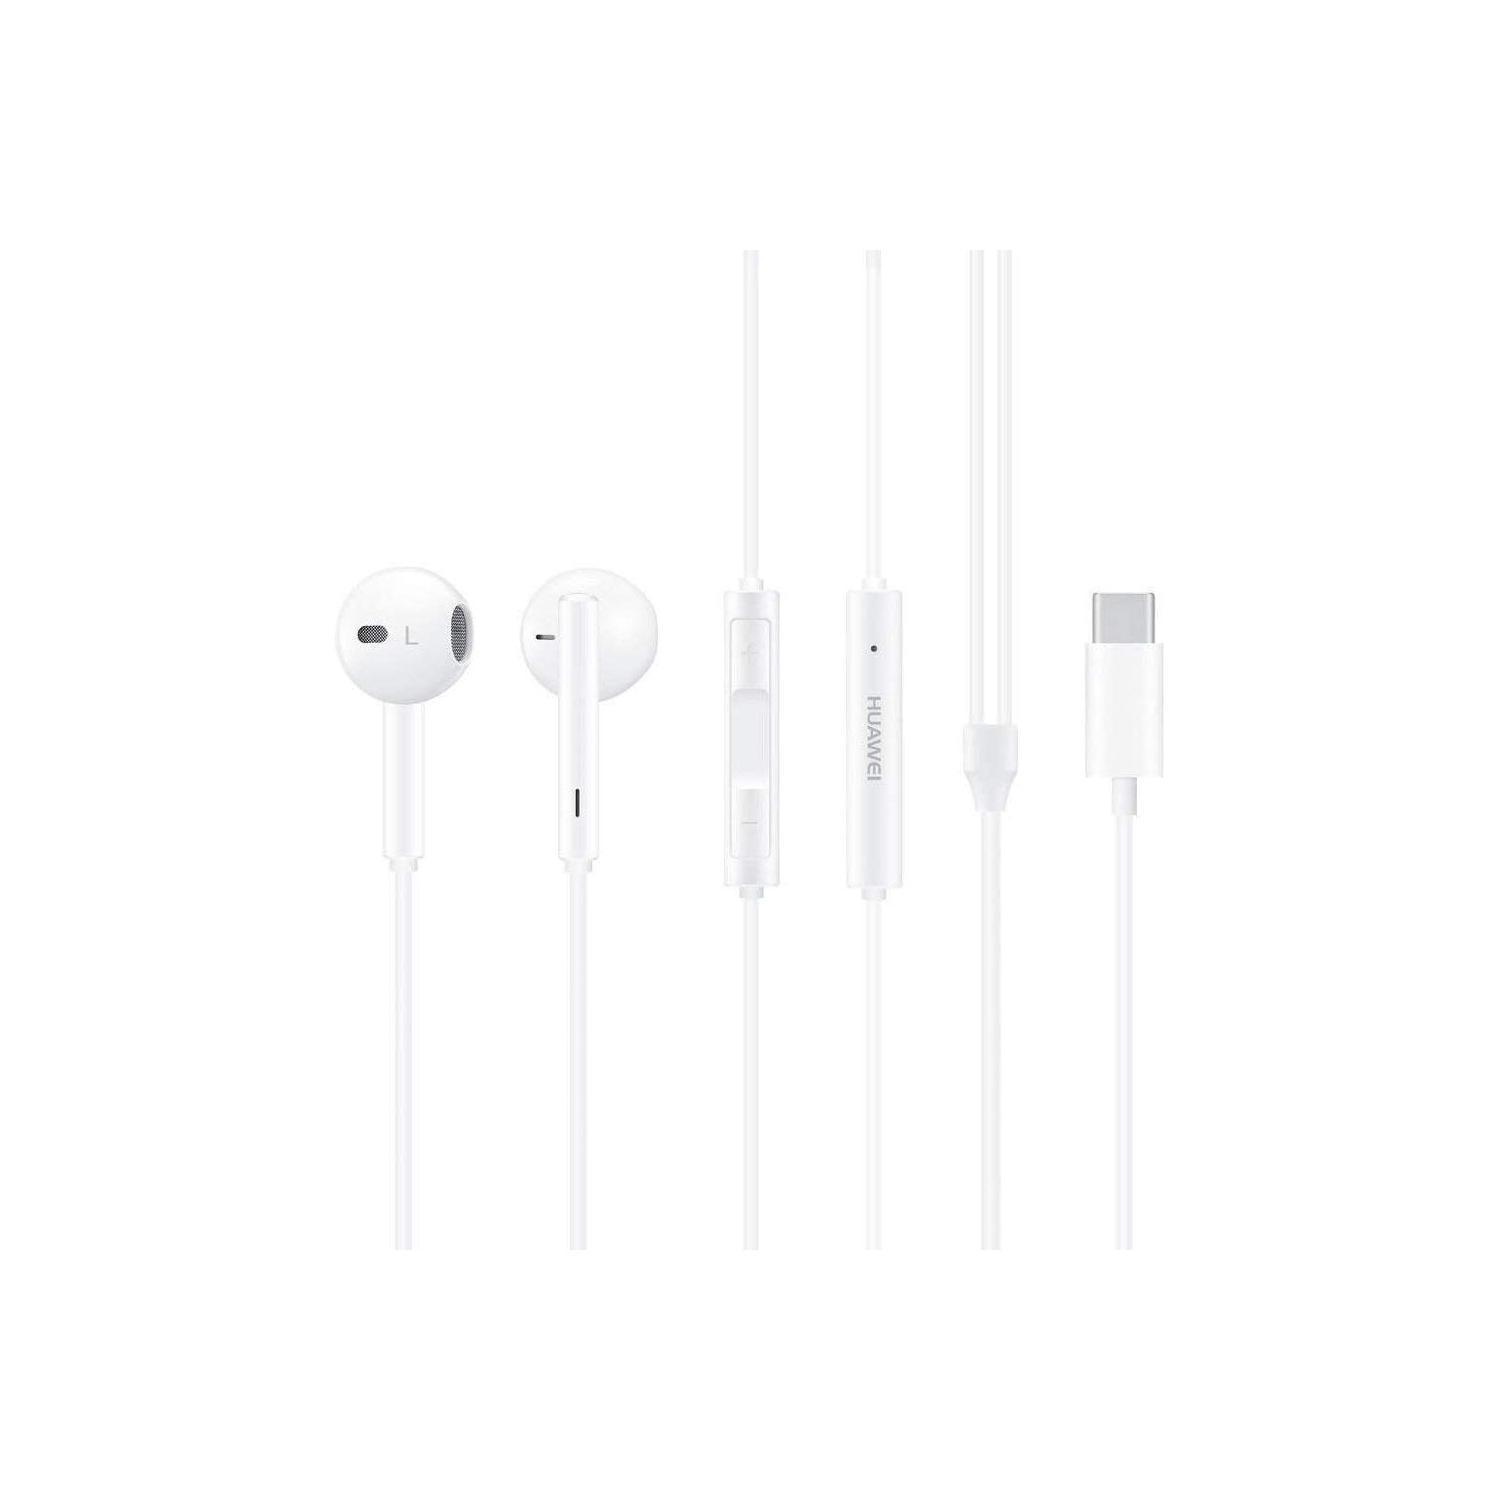 (CABLESHARK) Compatible for Huawei CM33 USB Type C Handsfree Earphones with Remote and Microphone for Huawei Mate 20 Pro / P20 / P20 Pro - 55030088 - White (Bulk, Frustration Free Packaging)